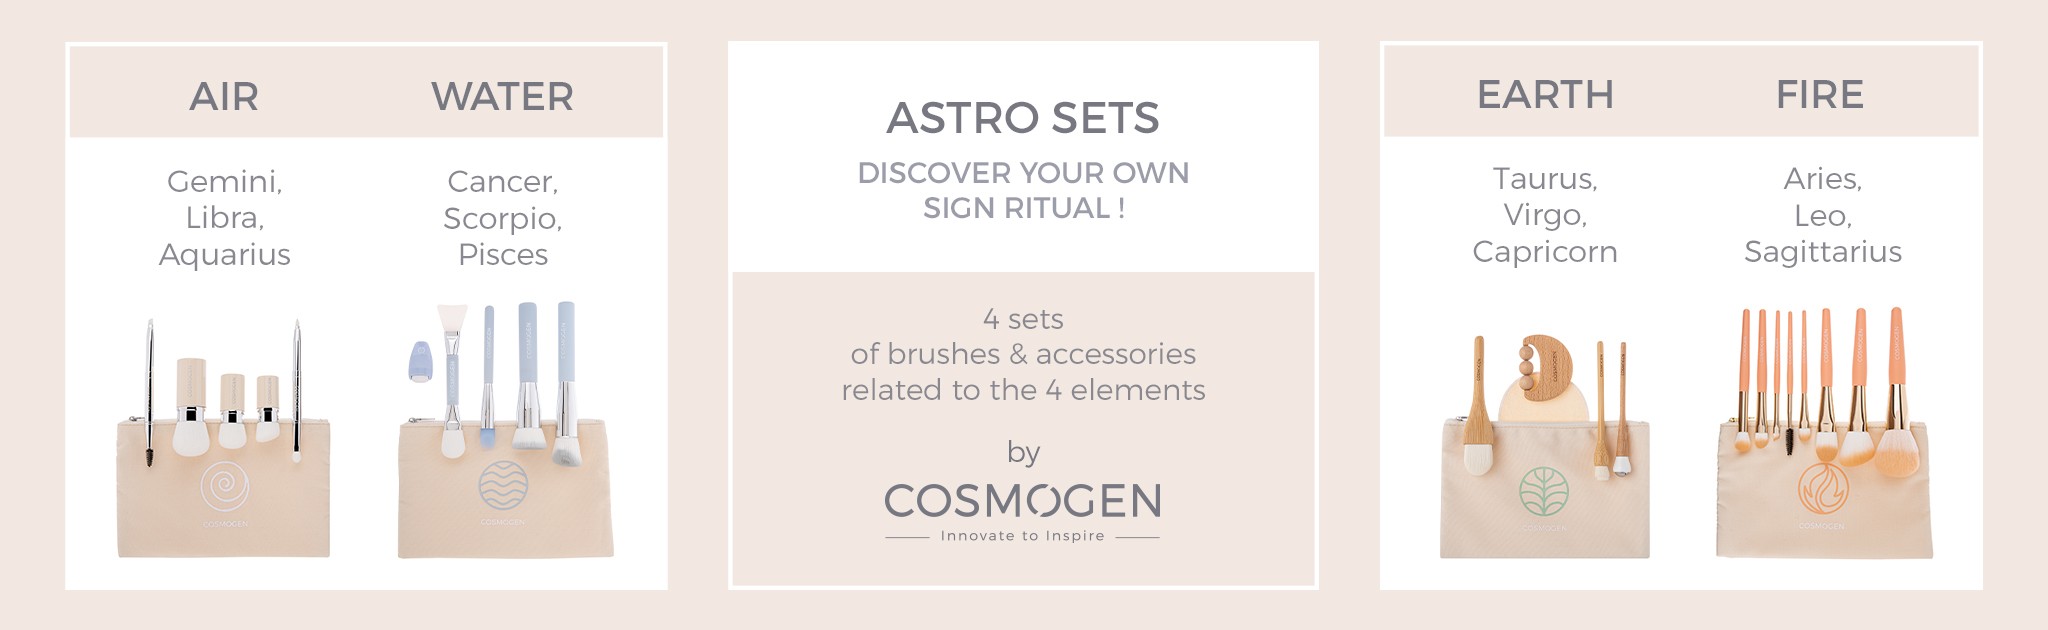 https://www.cosmogen.fr/astro-set-water.html?search_query=astro&results=4